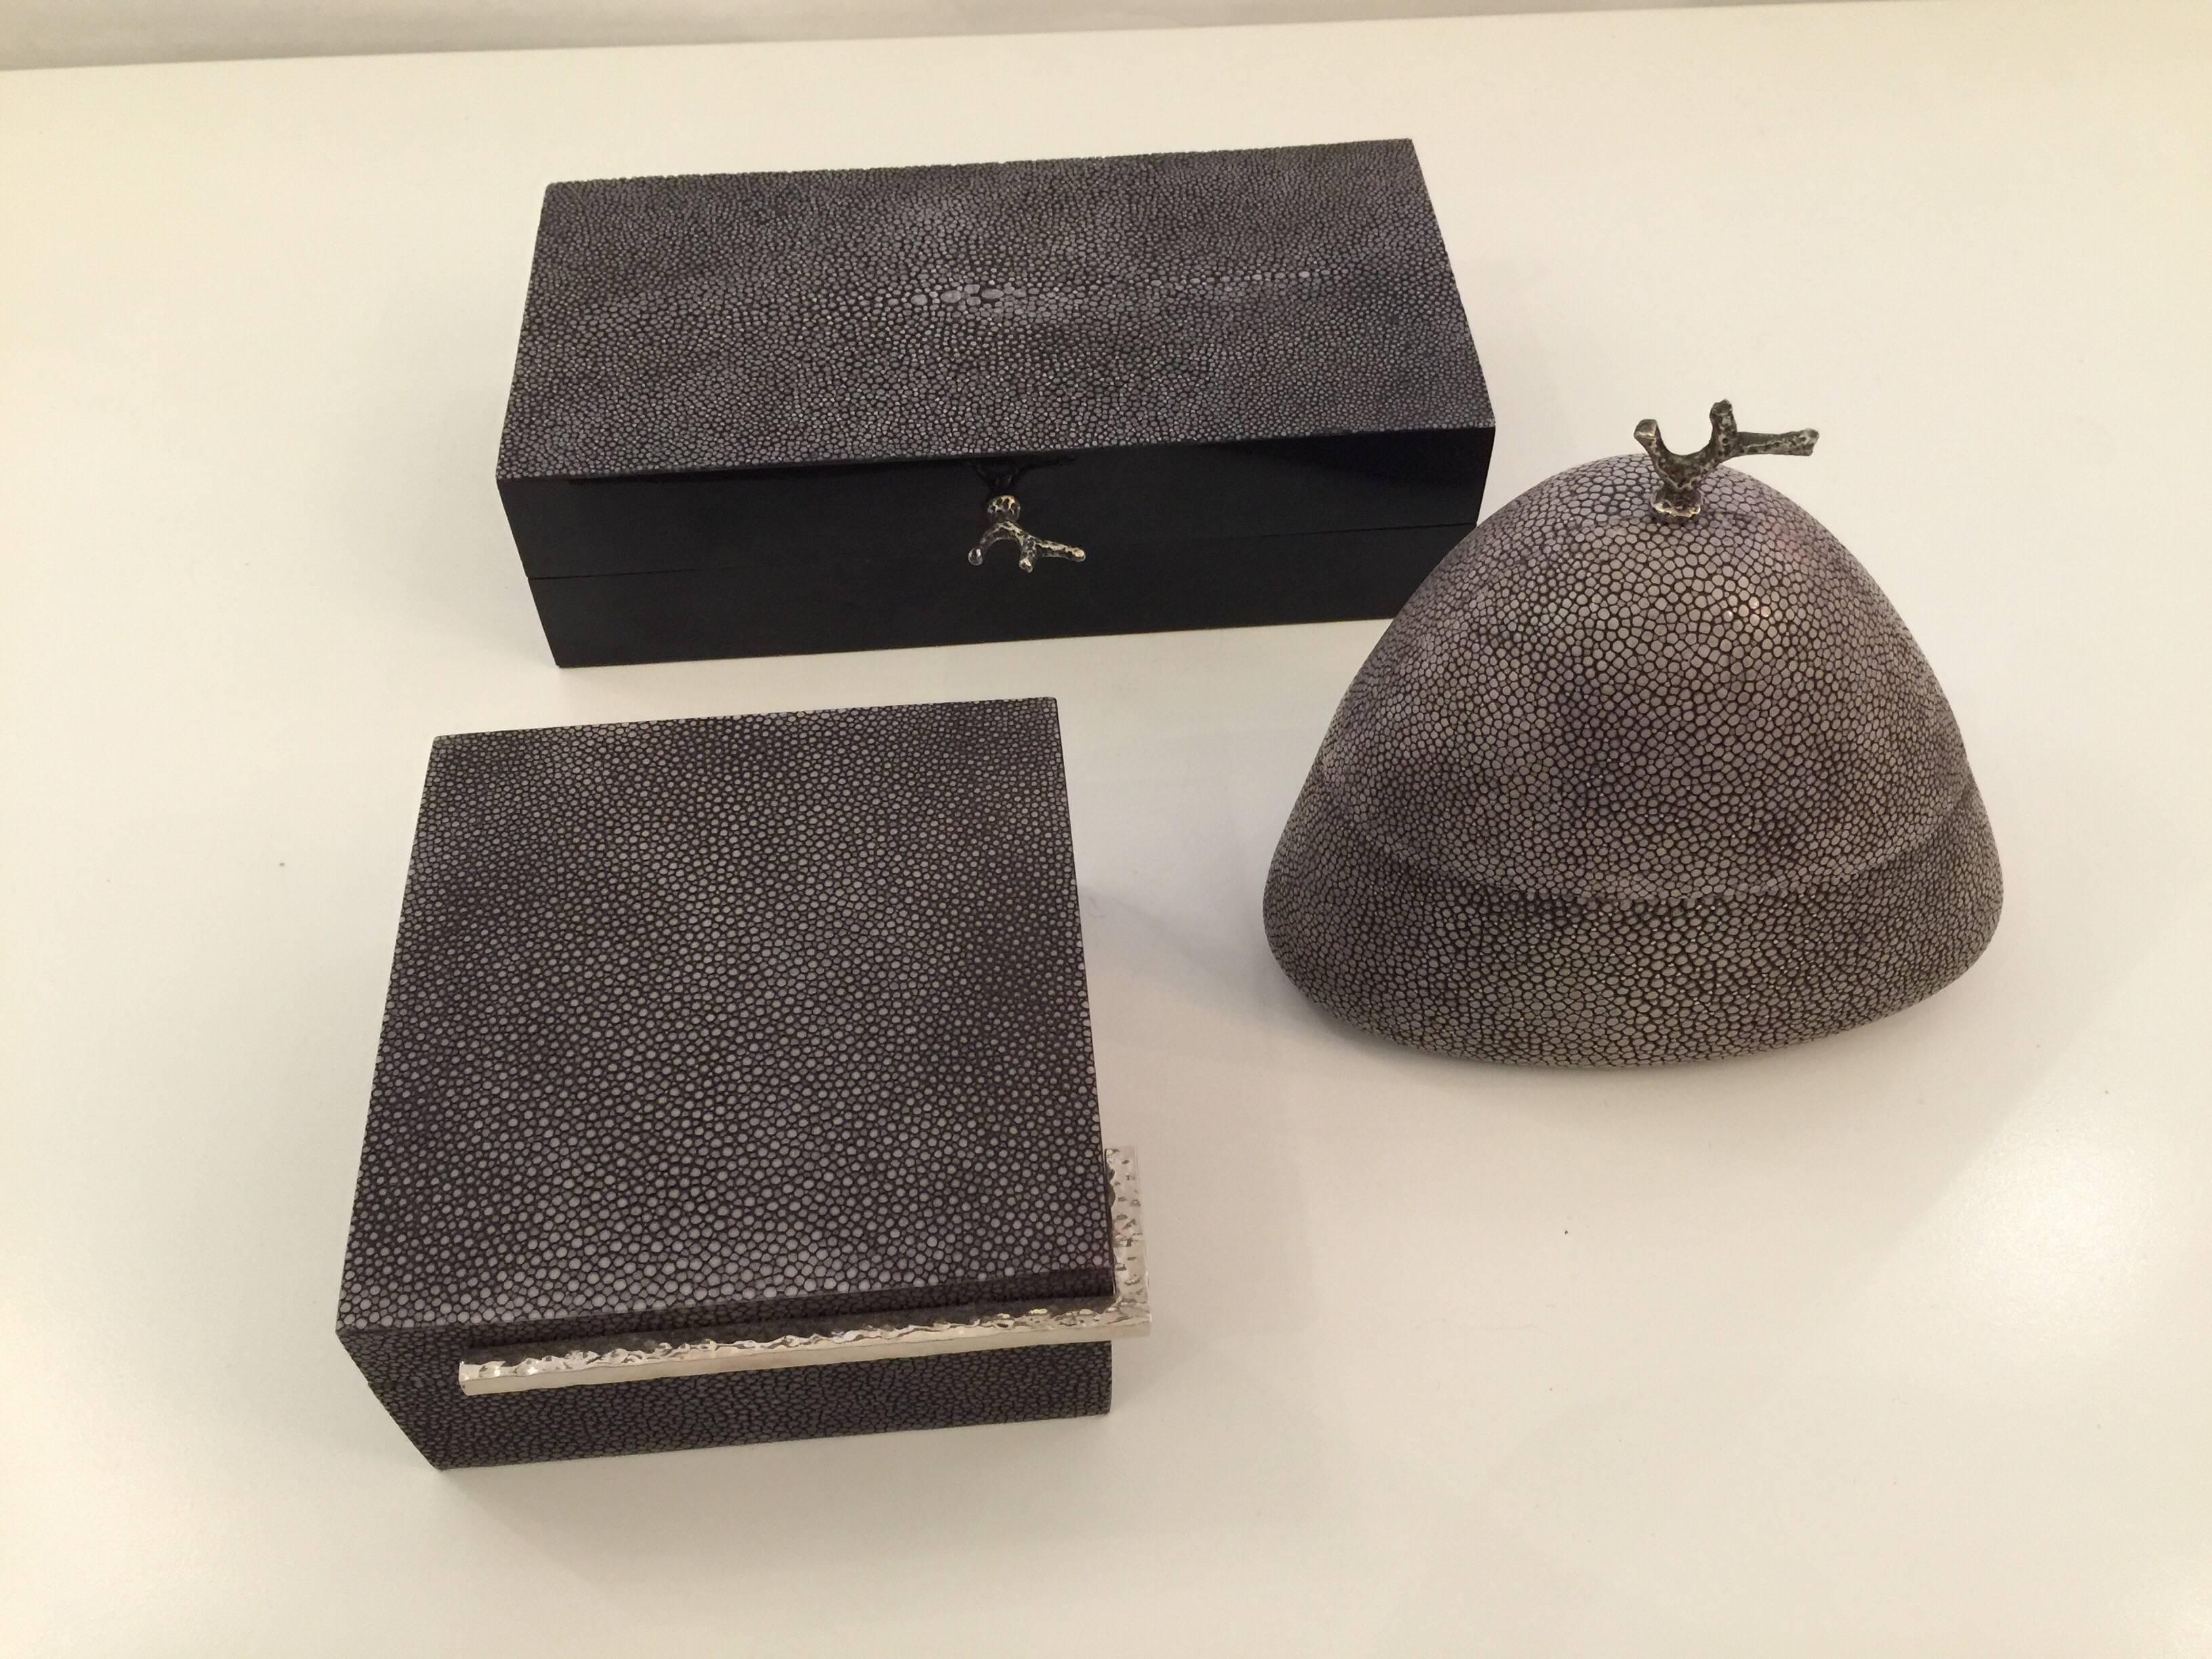 This is a lovely matching set of three grey toned shagreen covered boxes. The domed top box features a silver plate coral branch handle. The large rectangular box also has a coral branch handle. The square box is more linear. Interiors are lined